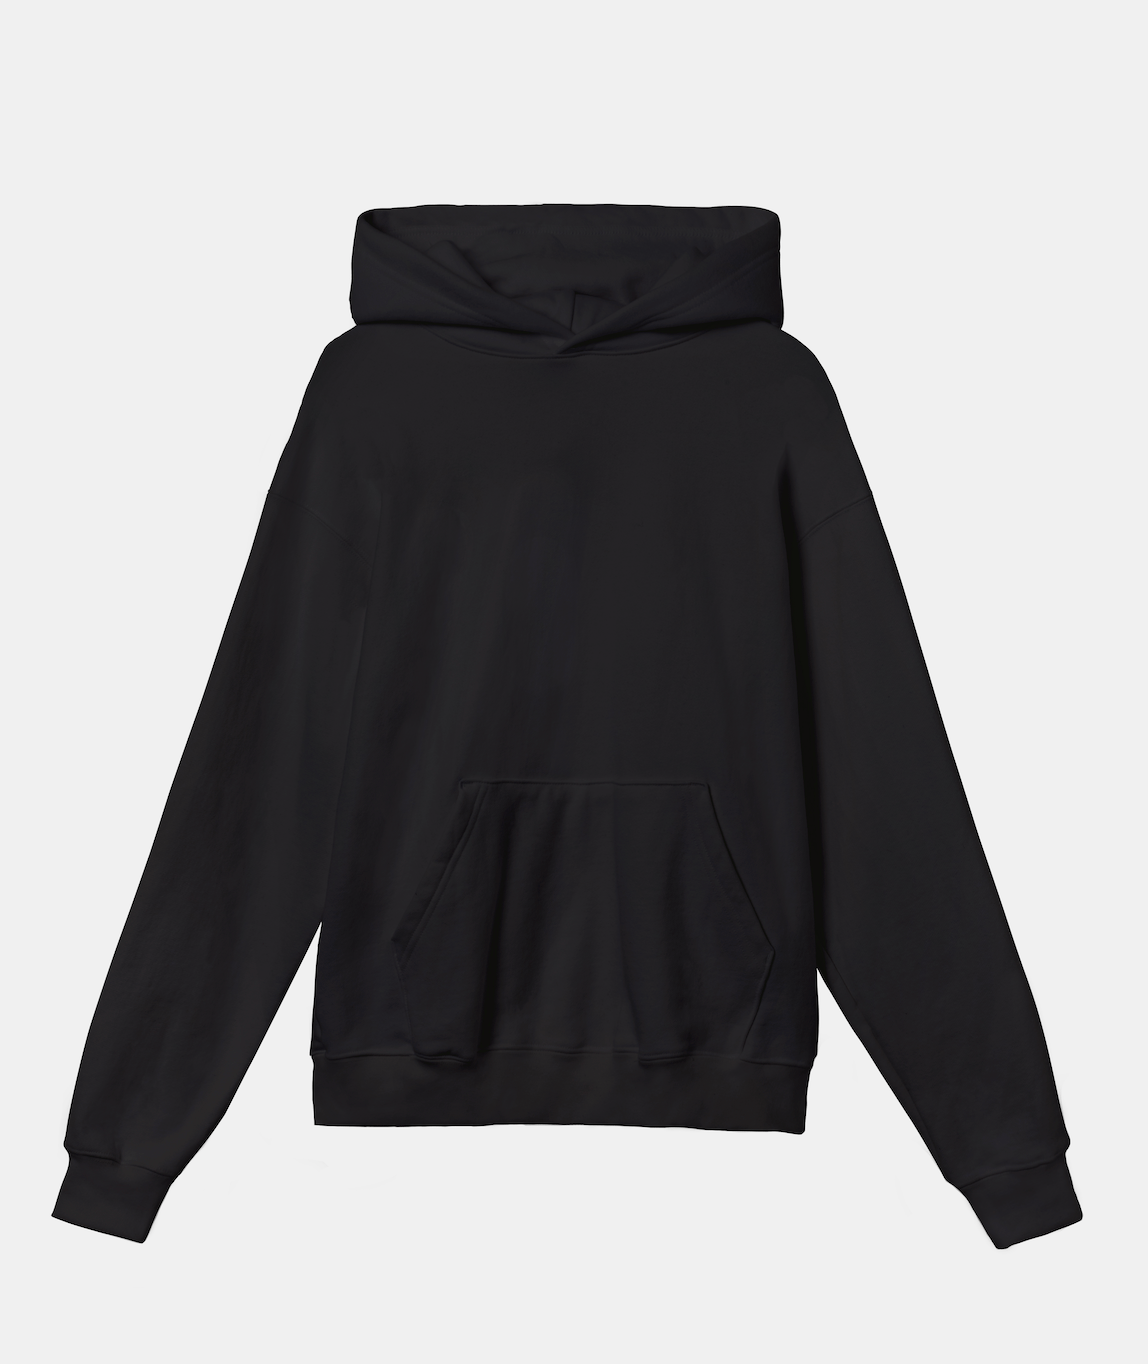 French Terry Hoodies | 100 Percent Cotton Hoodies